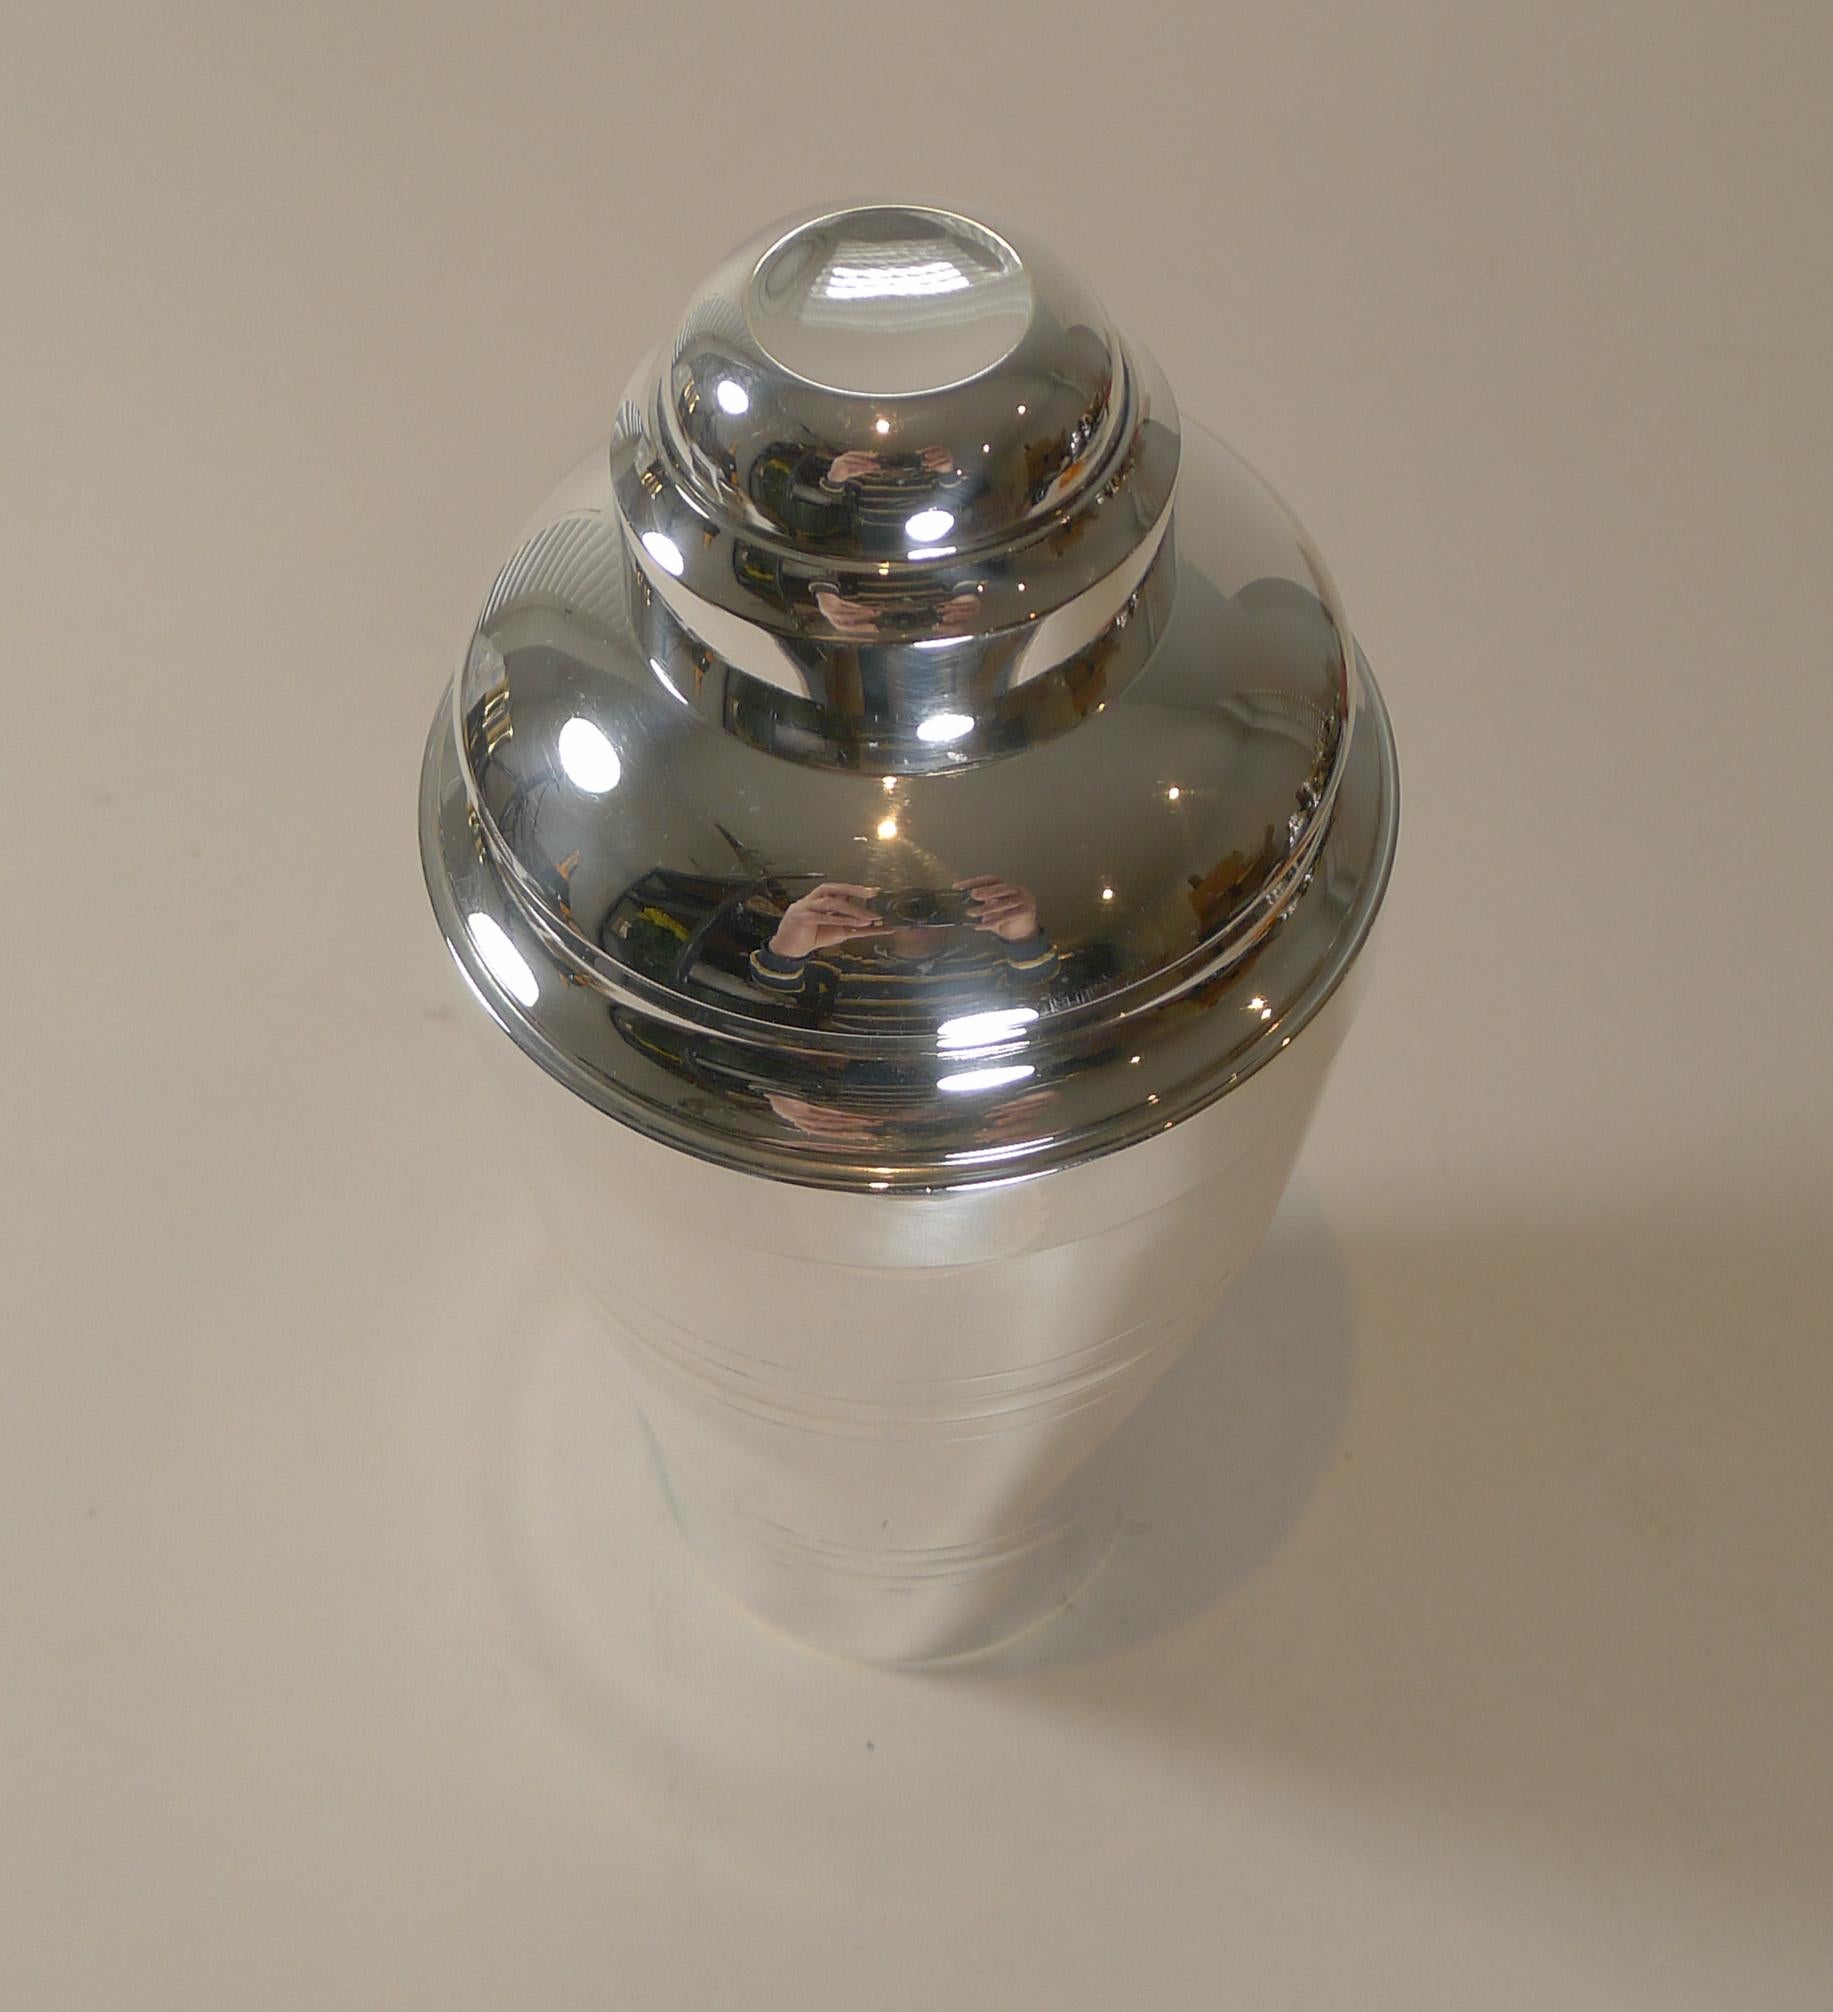 French Art Deco Cocktail Shaker with Lemon Reamer c.1930 by St. Medard, Paris In Good Condition For Sale In Bath, GB